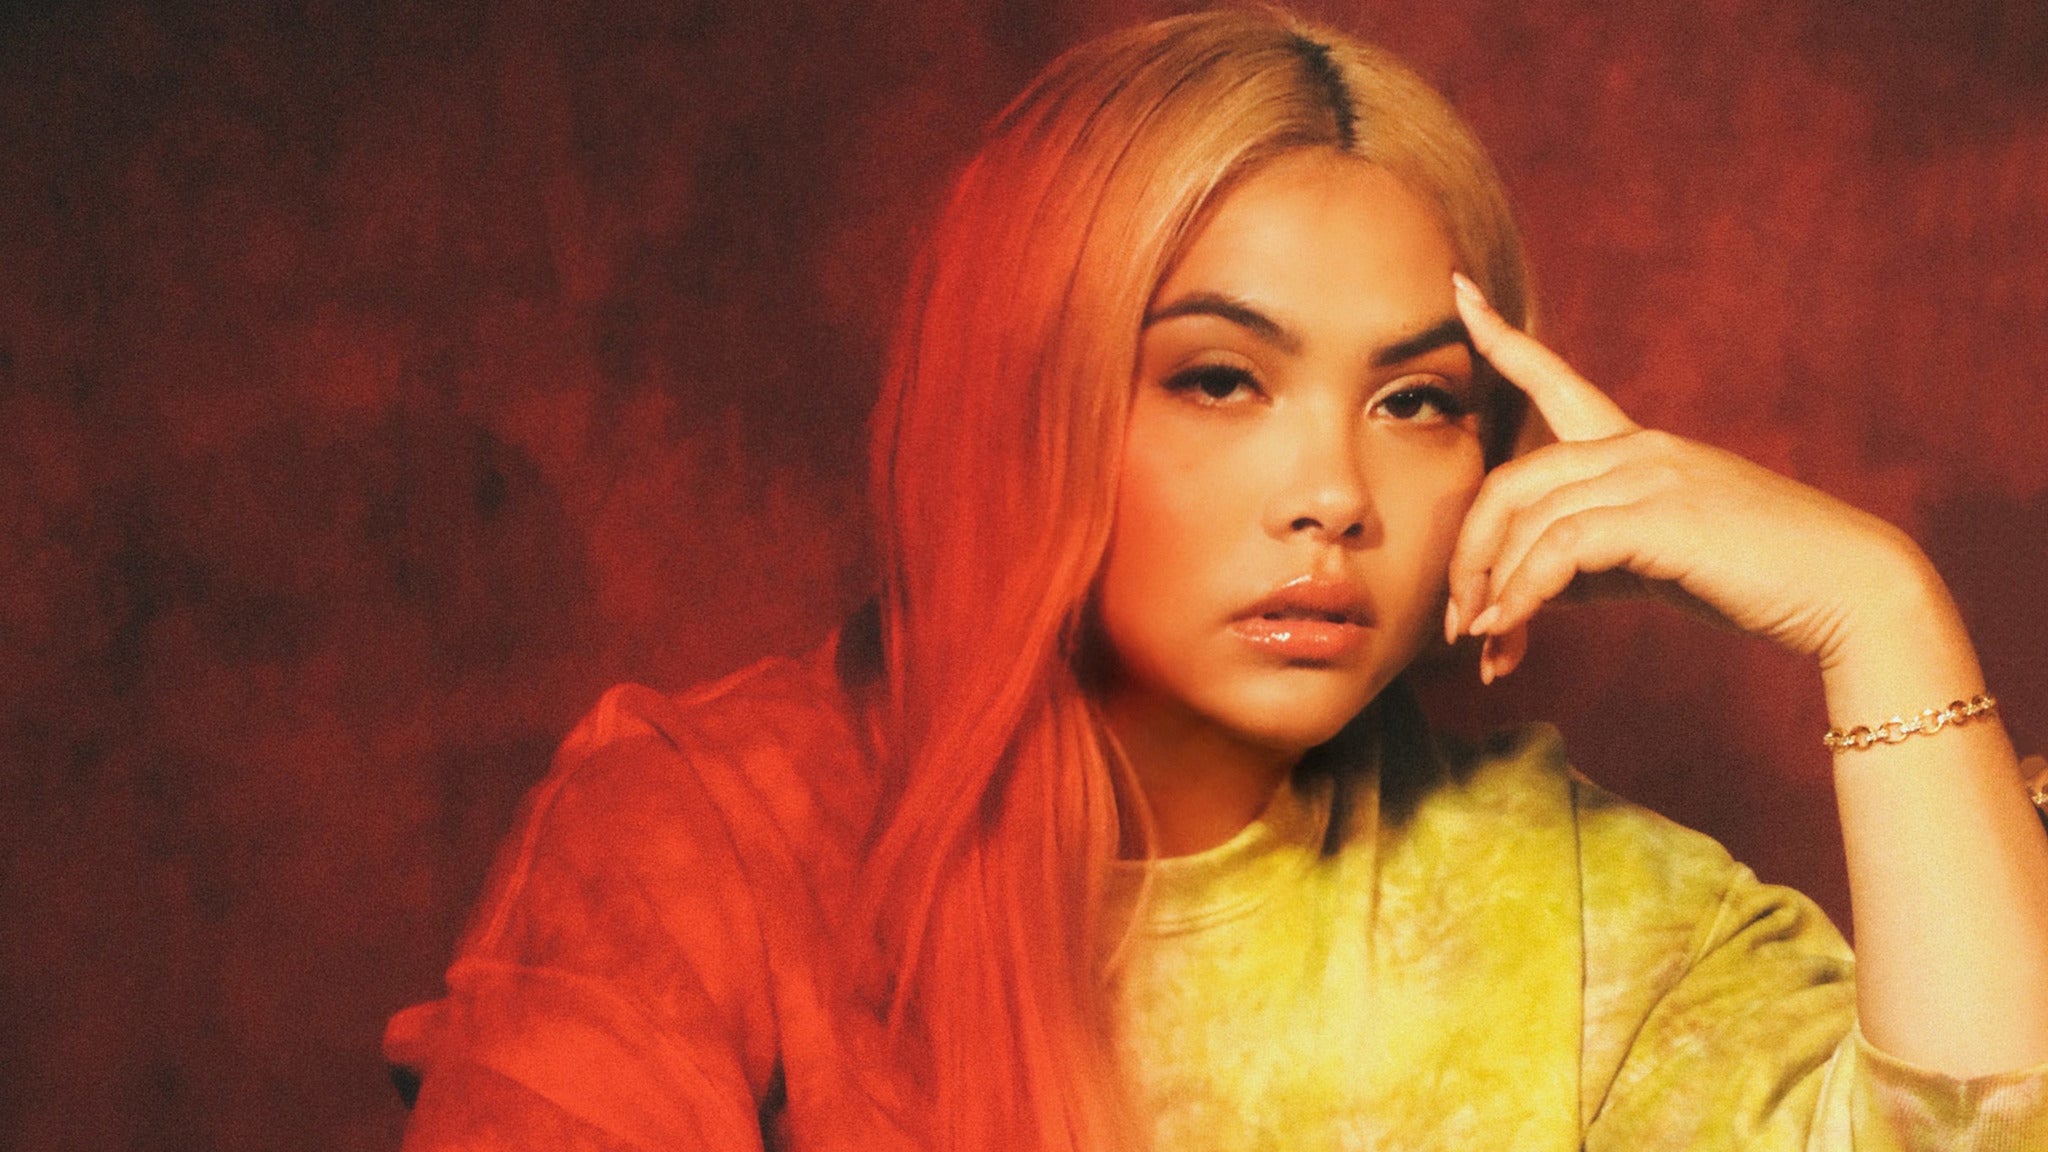 Hayley Kiyoko - Expectations North American Tour in Silver Spring promo photo for Citi Preferred presale offer code